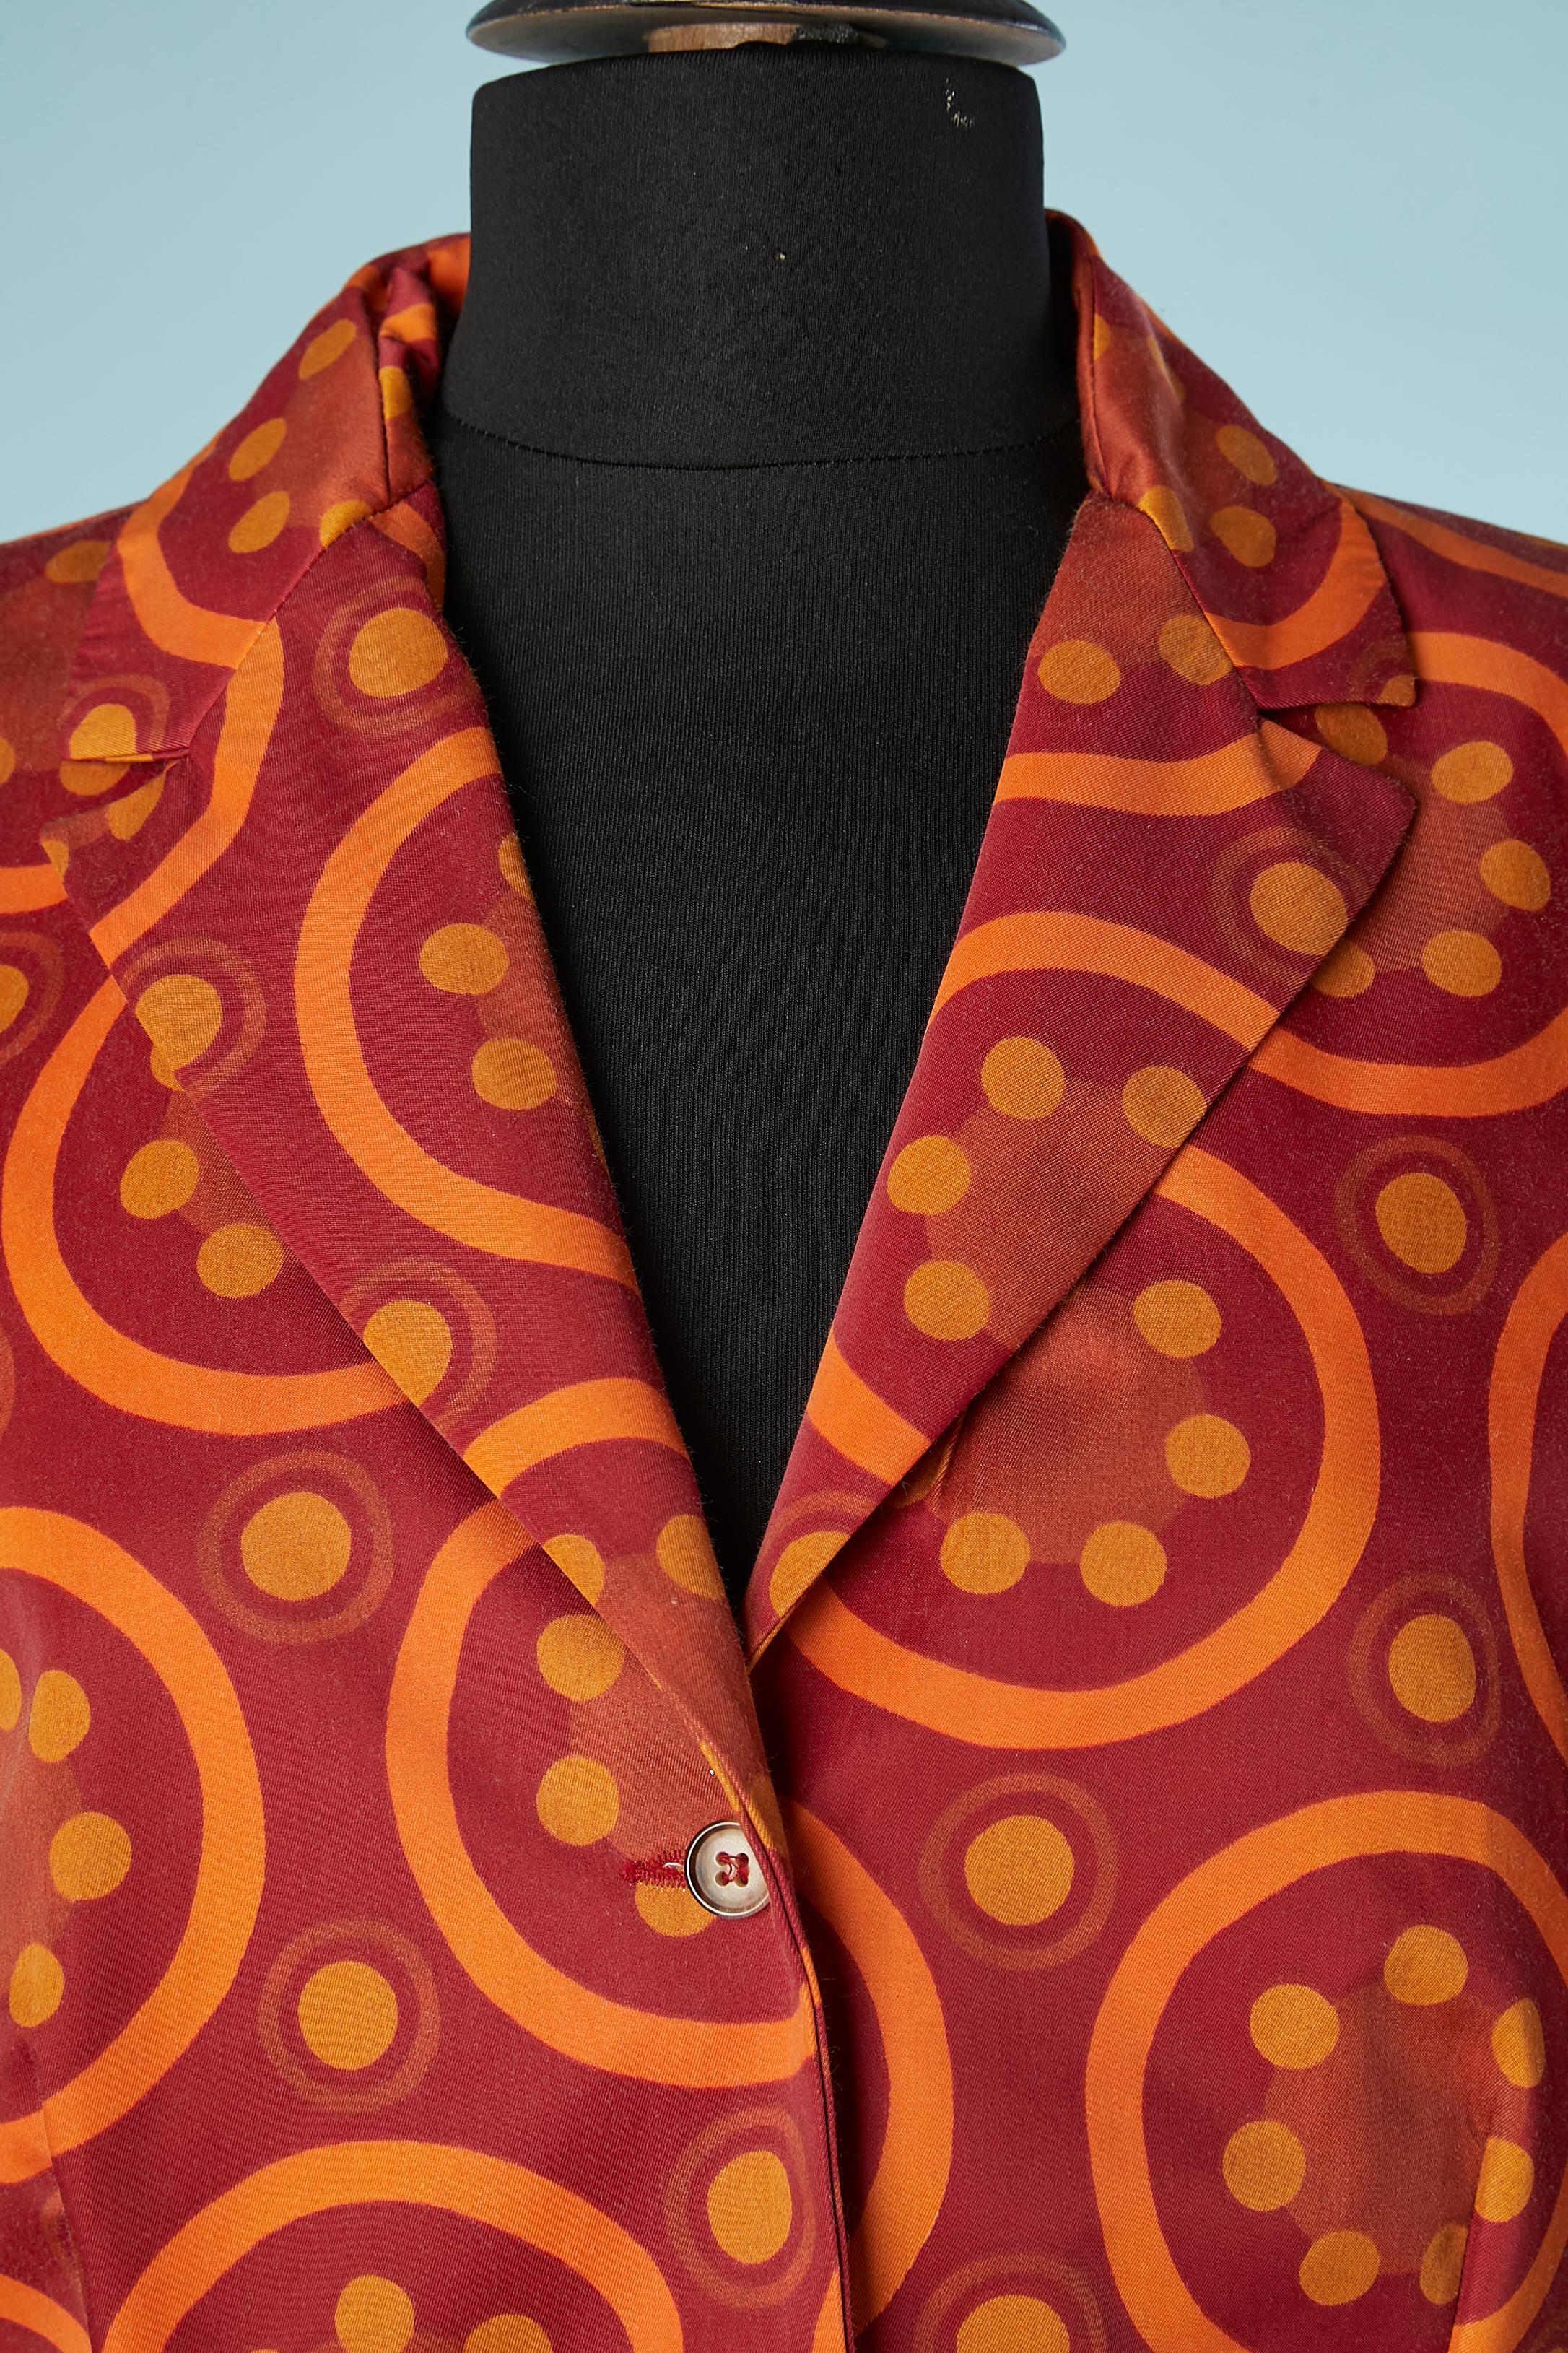 Orange and red abstract printed skirt-suit.Shoulder pads. Pockets . Fabric composition: 53% nylon, 33% rayon, 14% cotton. Lining: Rayon & Bemberg 
SIZE 44 (It) 40 (Fr) L (US) 